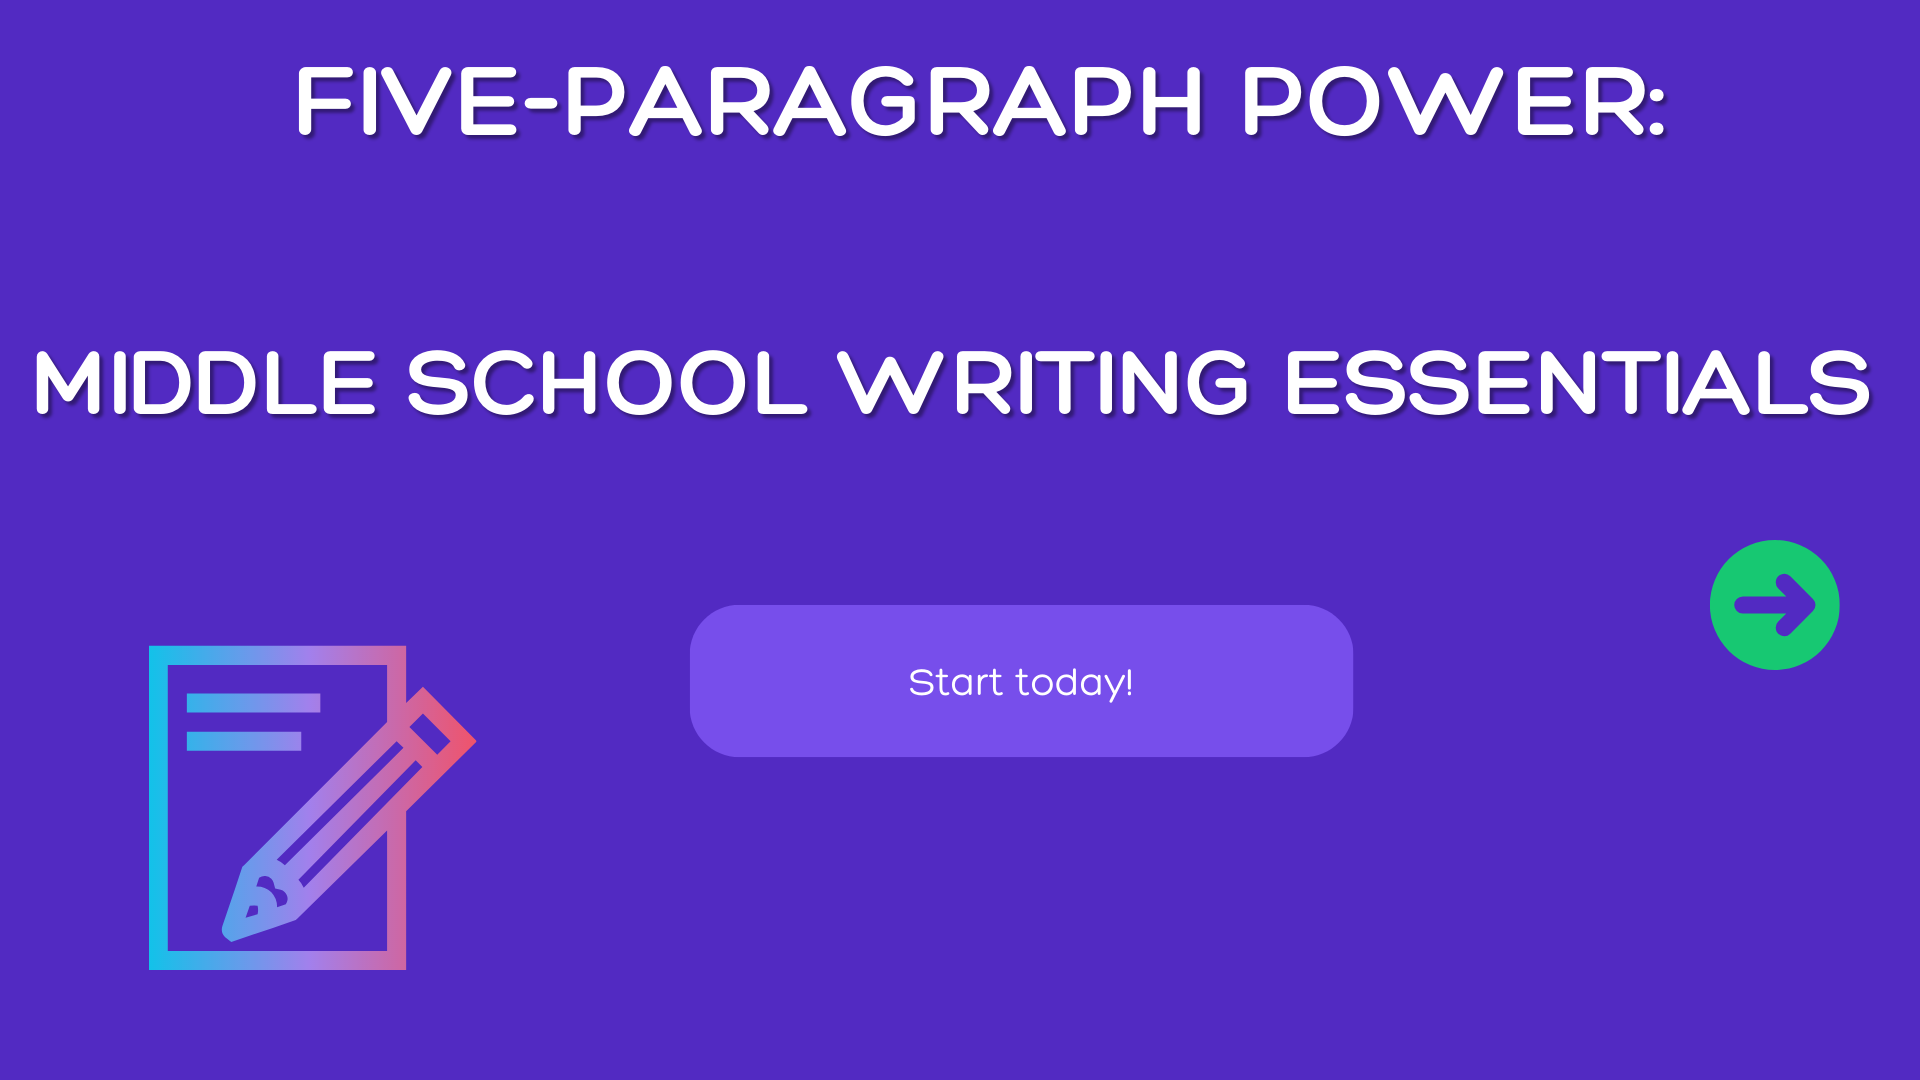 Five-Paragraph Power: Middle School Writing Essentials